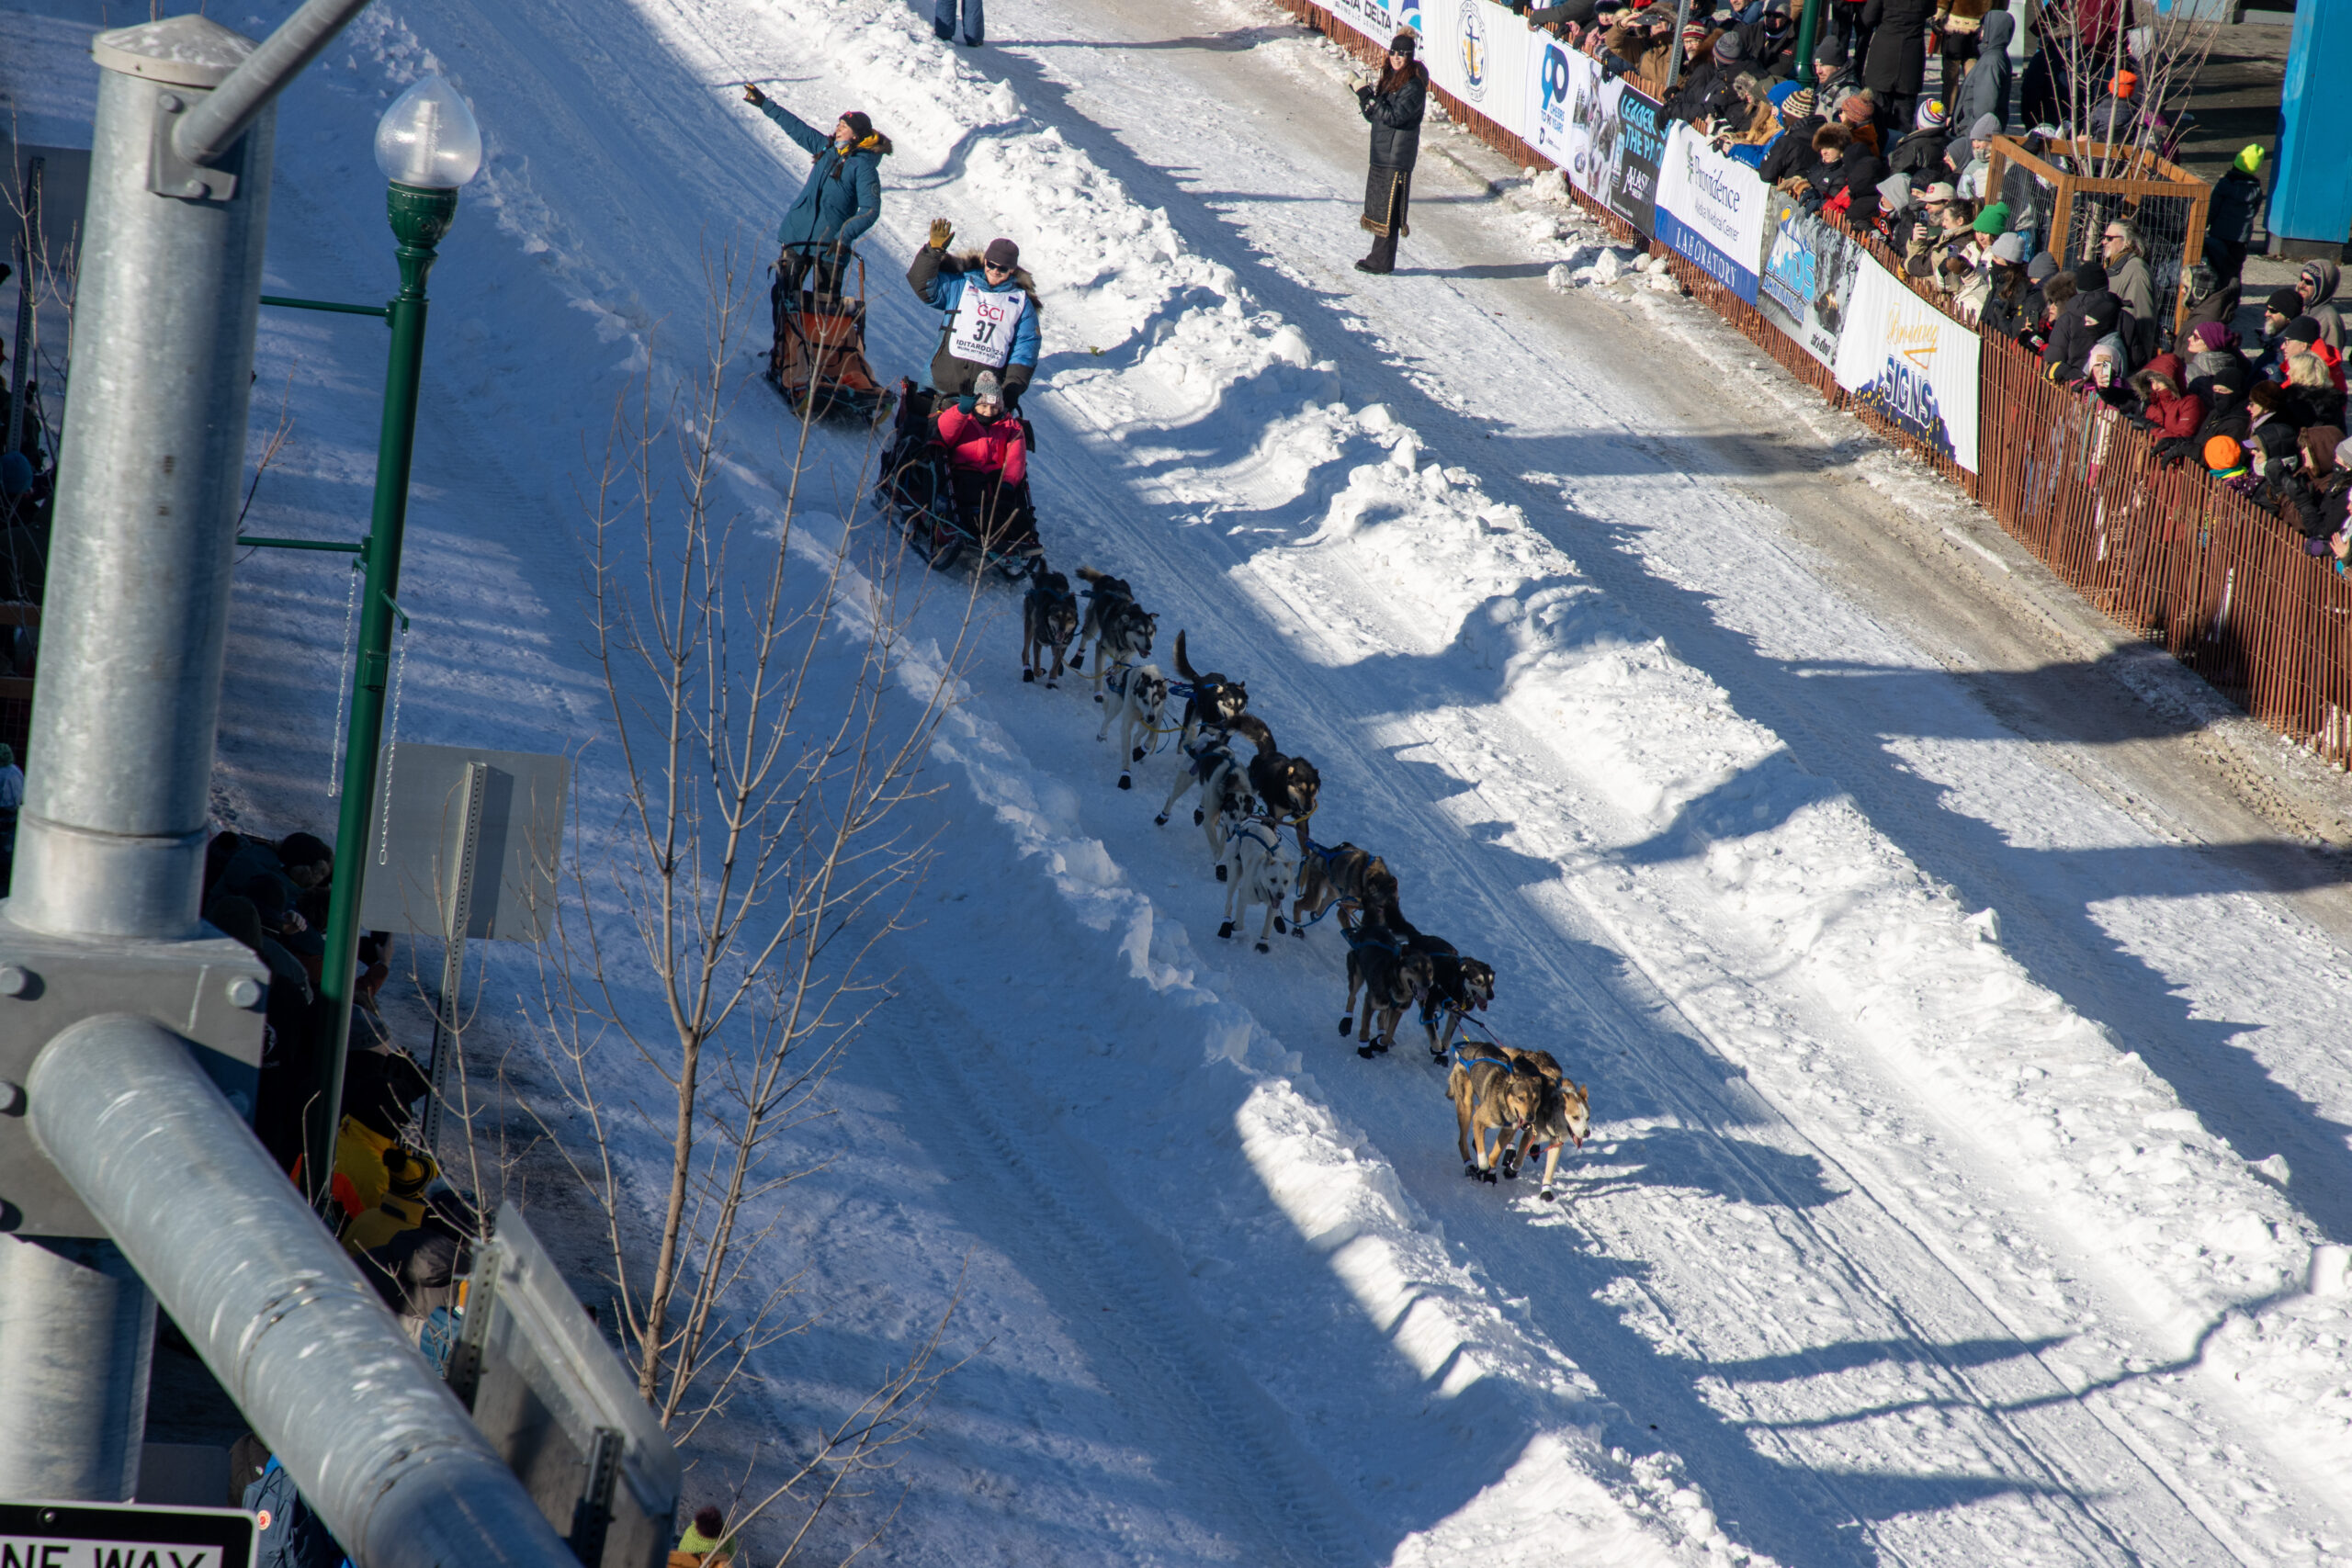 A woman on a sled in heavy winter clothing with bib number 37 being pulled by dogs down a road as viewed from above.